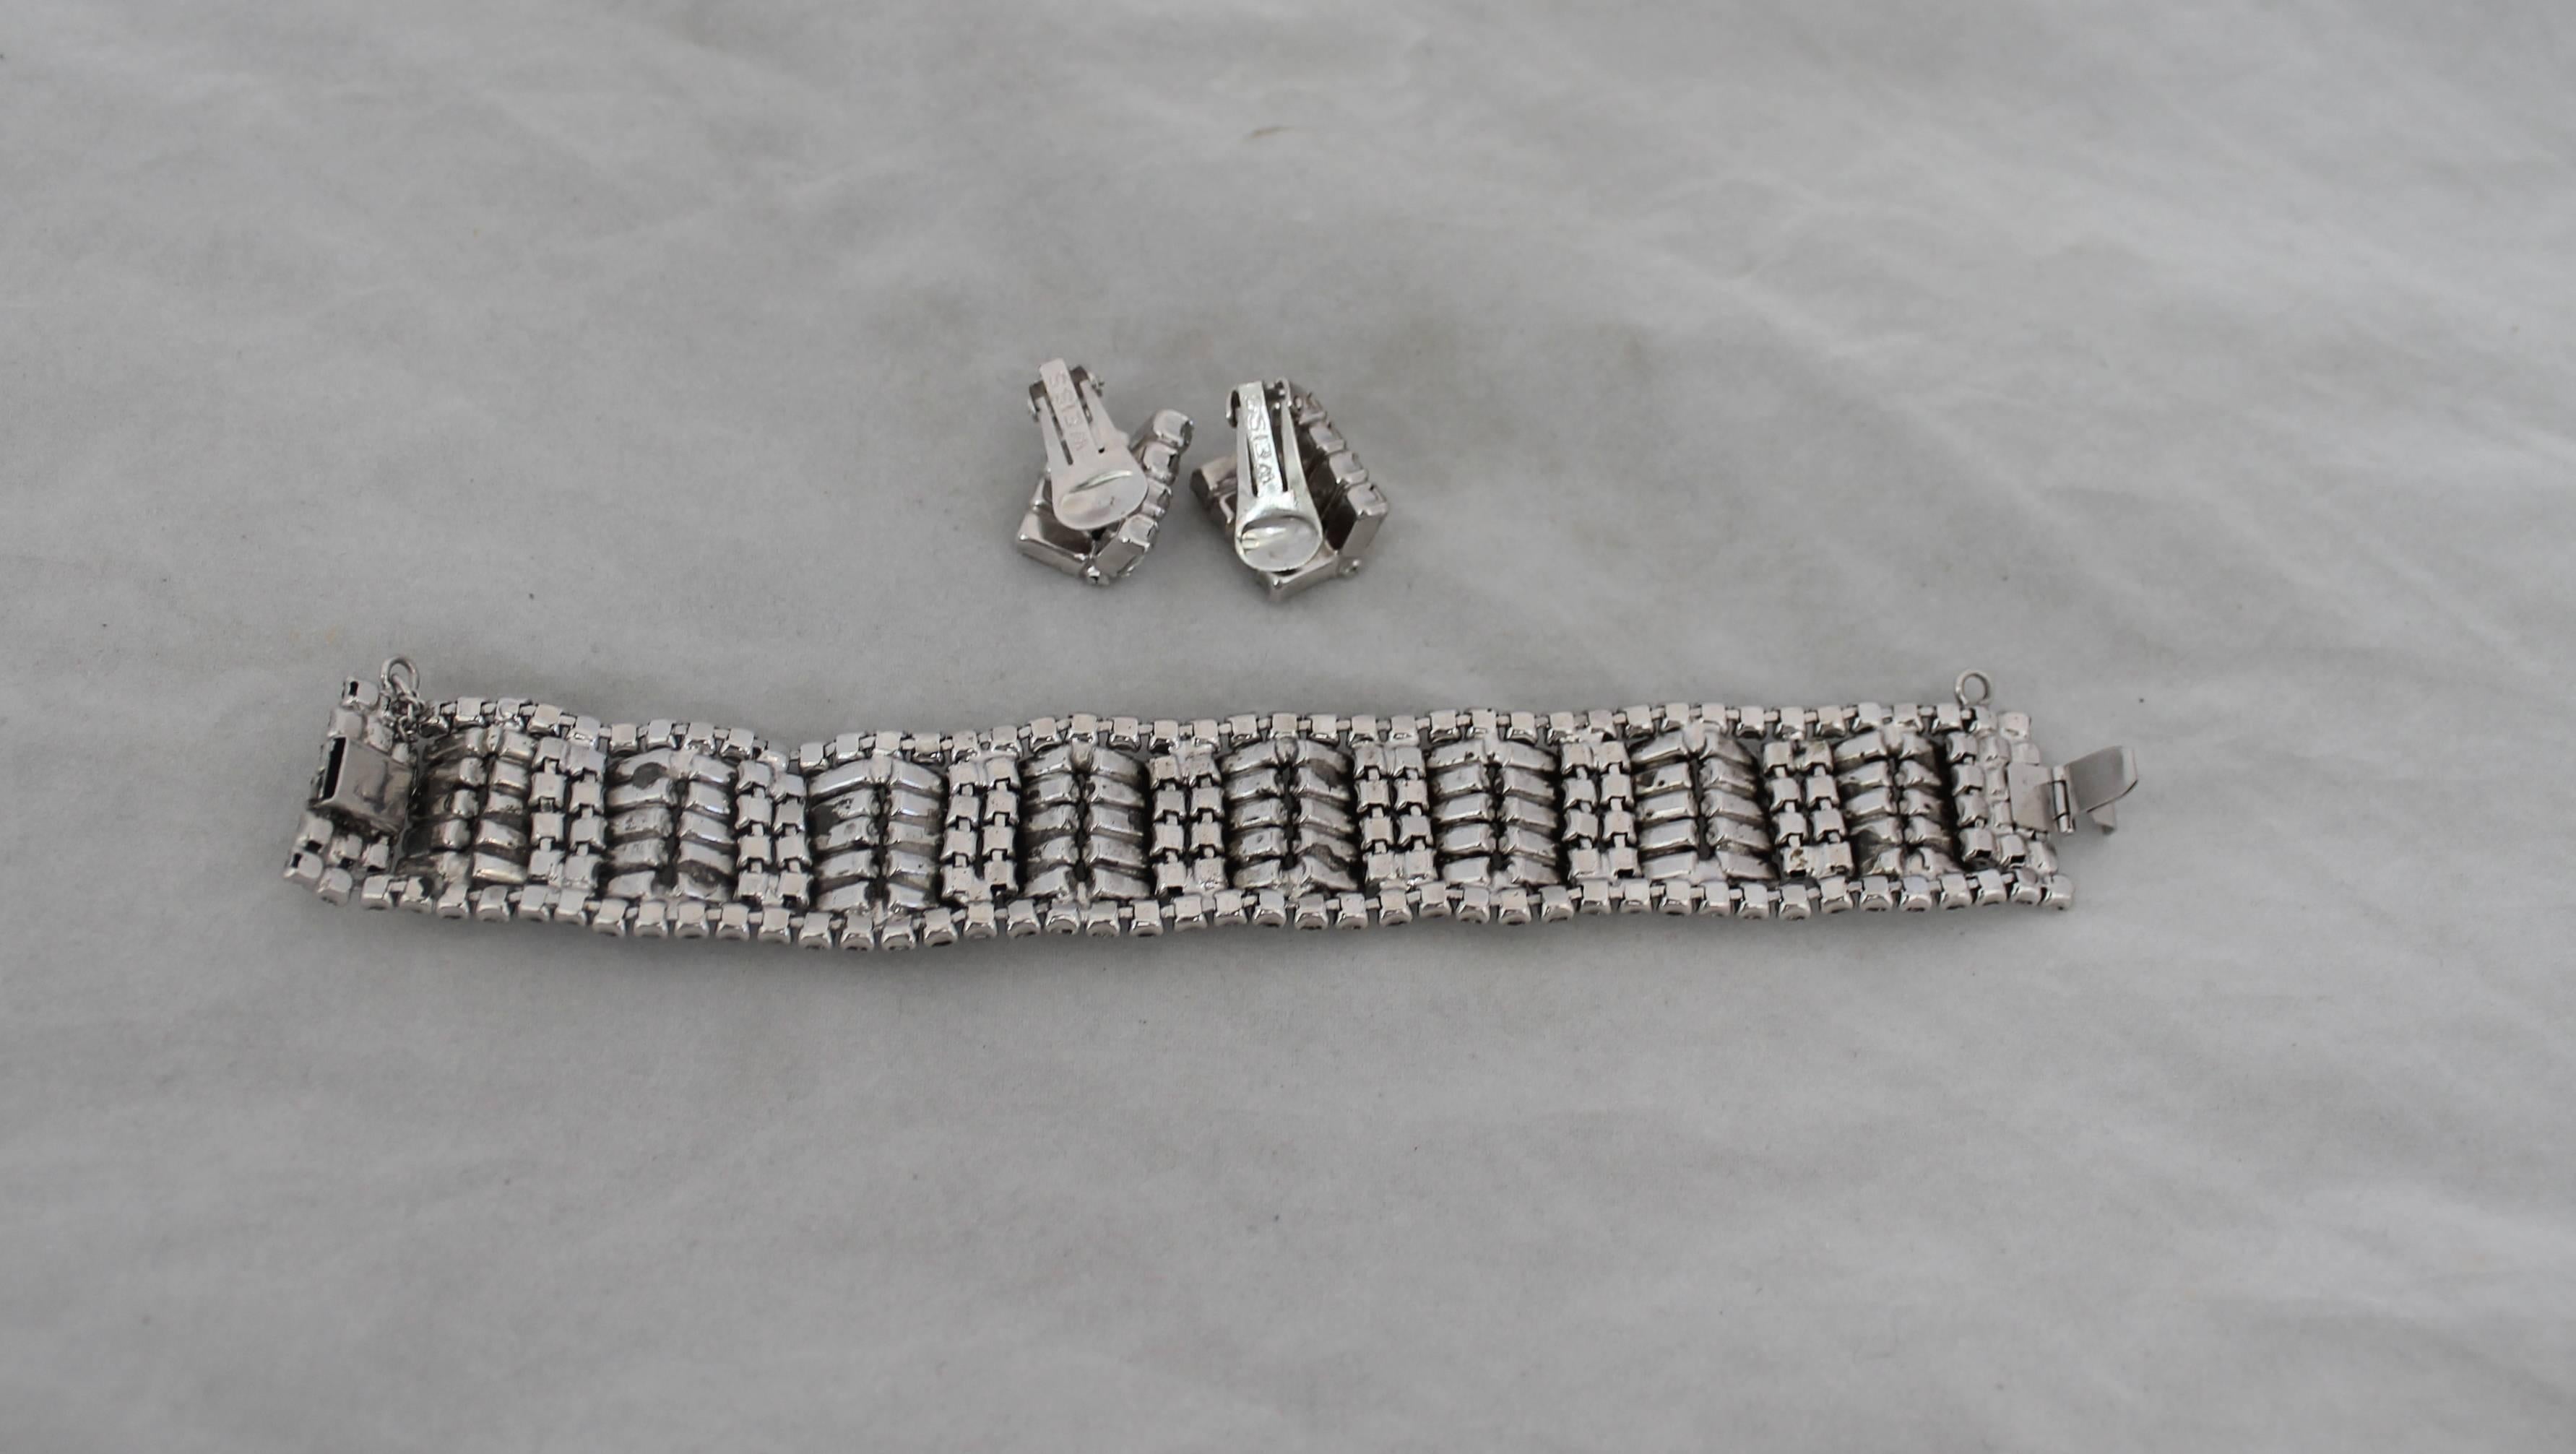 Weiss Vintage Art Deco Style Rhinestone Demi Parure - circa 1950's. These pieces are in excellent vintage condition with no stones missing. They have baguette-like rhinestones in a stack shape to give them an art deco feel. The earrings are also